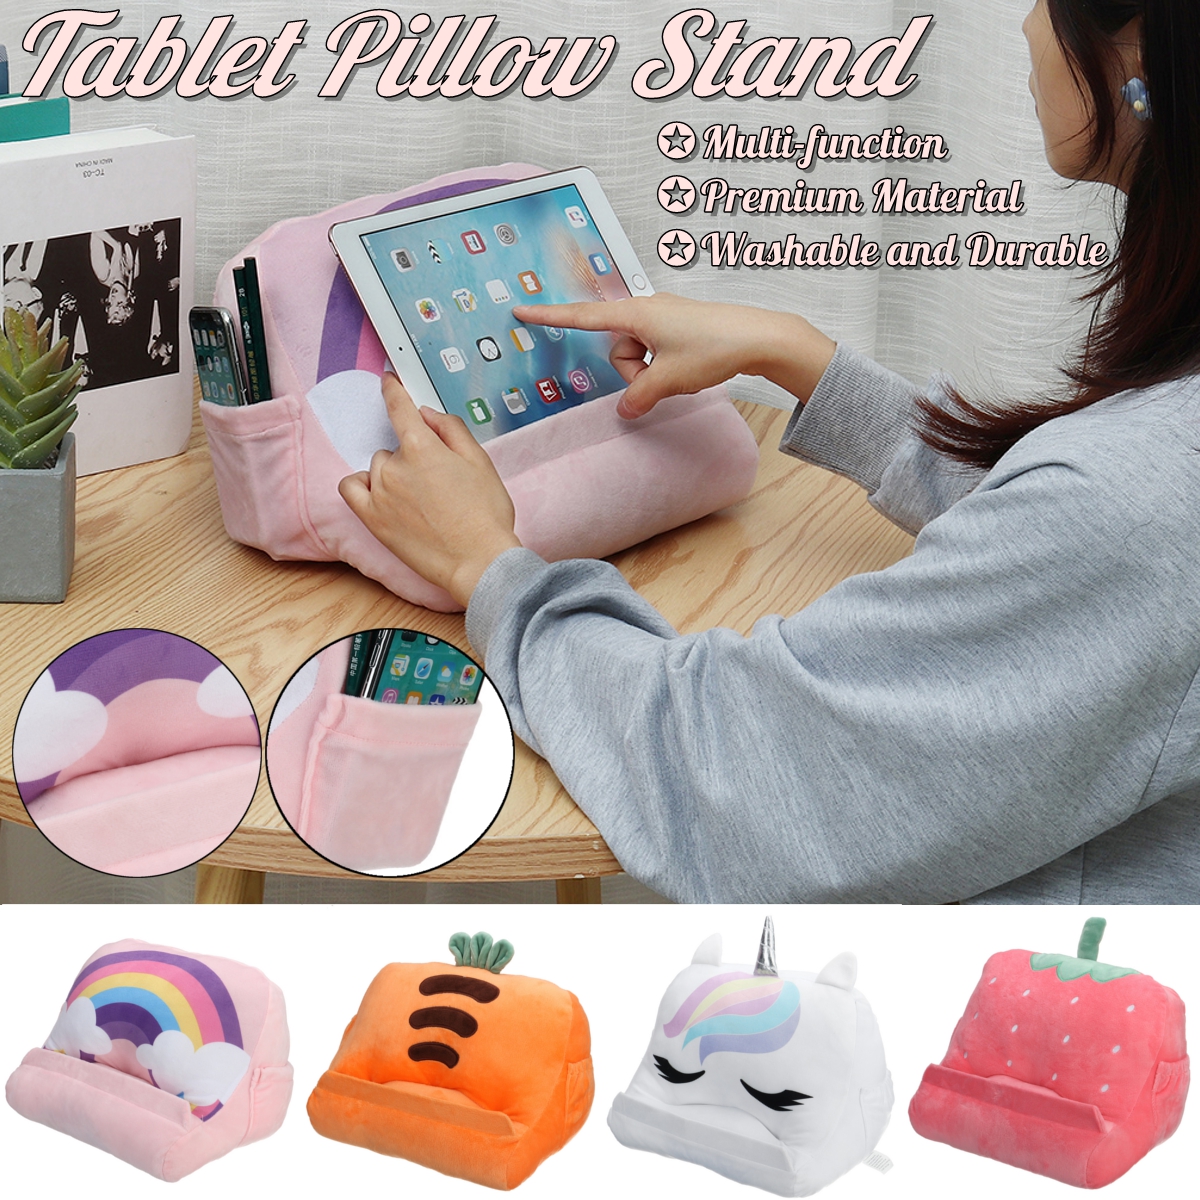 30x20x20cm-Tablet-Pillow-Cushion-Mini-Phone-Holder-Stand-Pocket-Home-Office-1974436-1